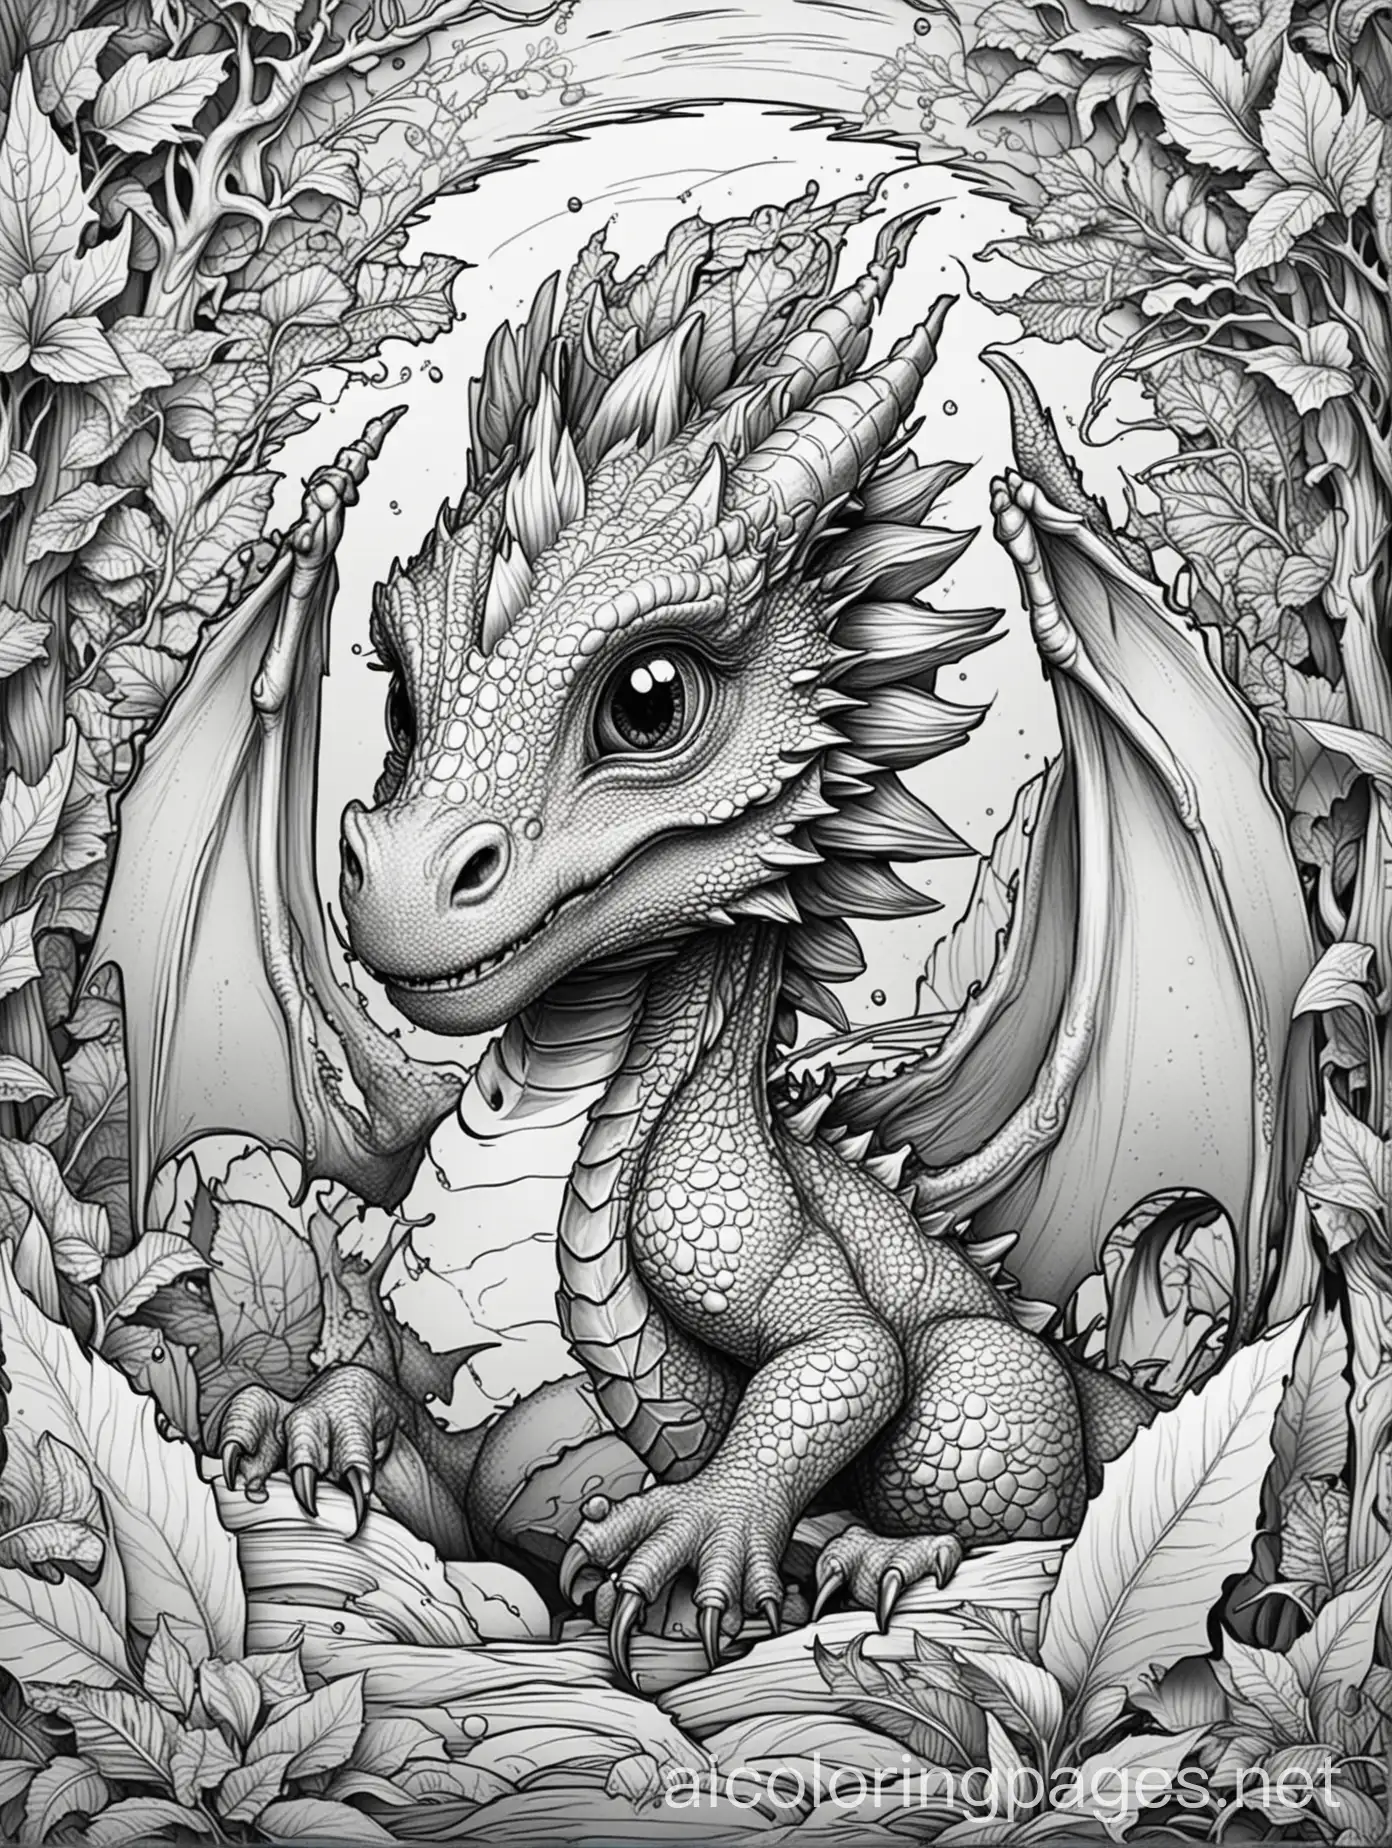 Adorable-Baby-Dragon-Coloring-Page-for-Kids-Comic-Book-Style